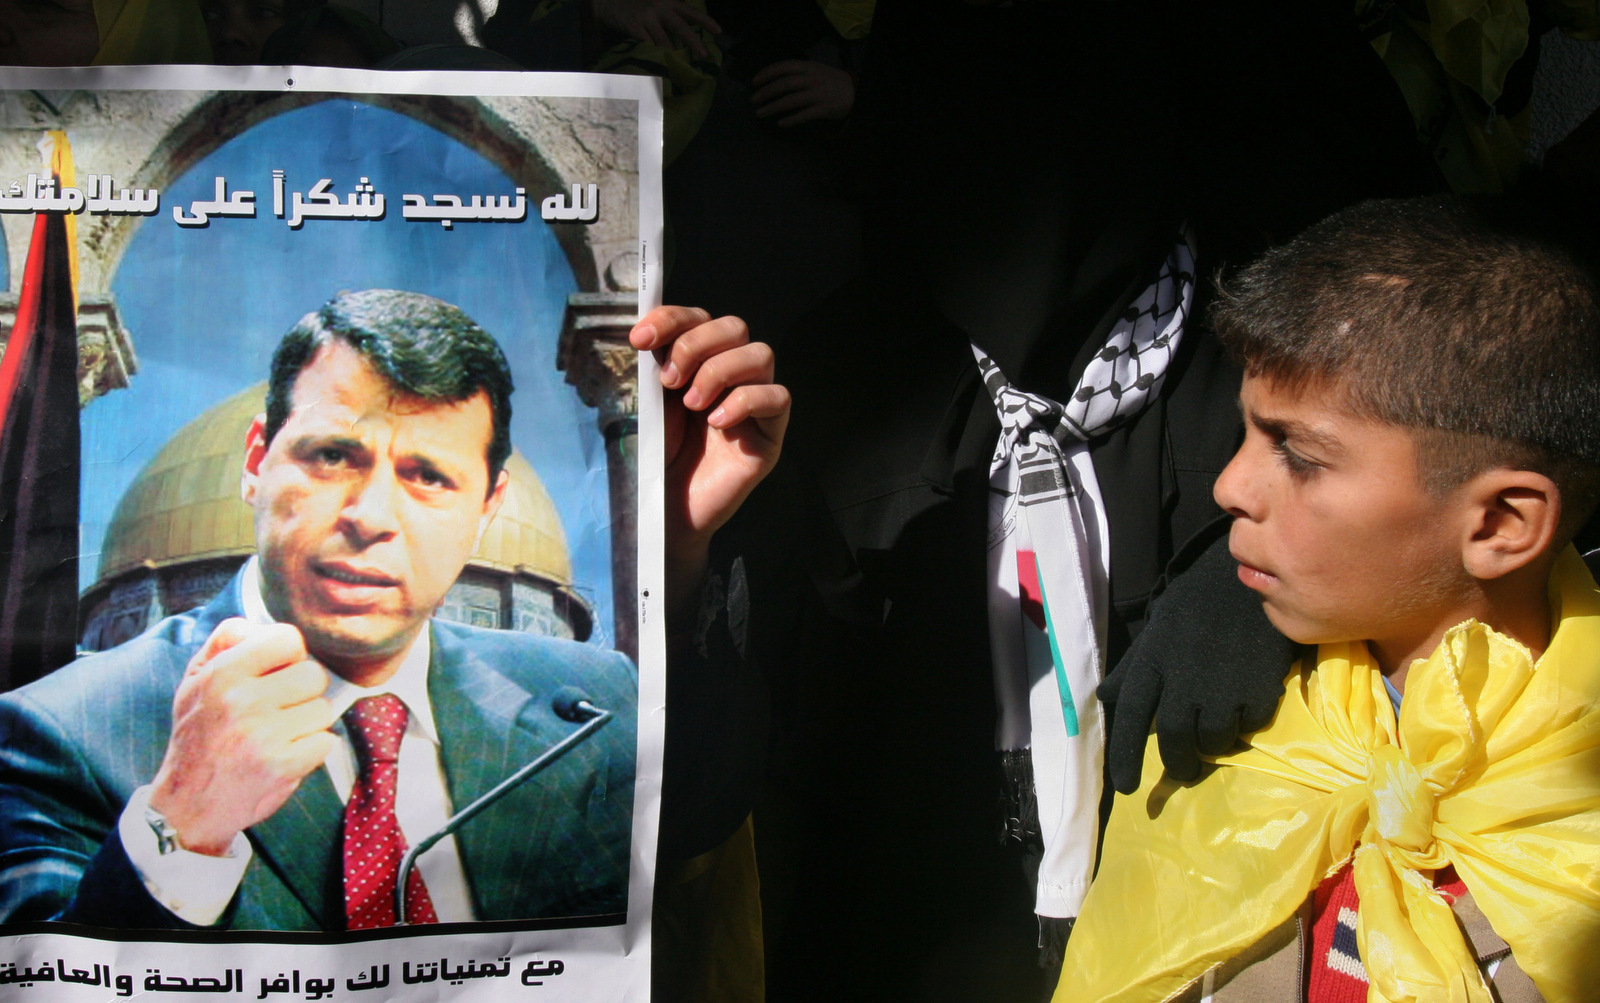 A Palestinian boy looks at a poster of Fatah leader Mohammed Dahlan during a rally in support of him in Gaza City, Dec. 16, 2006. (AP/Hatem Moussa)